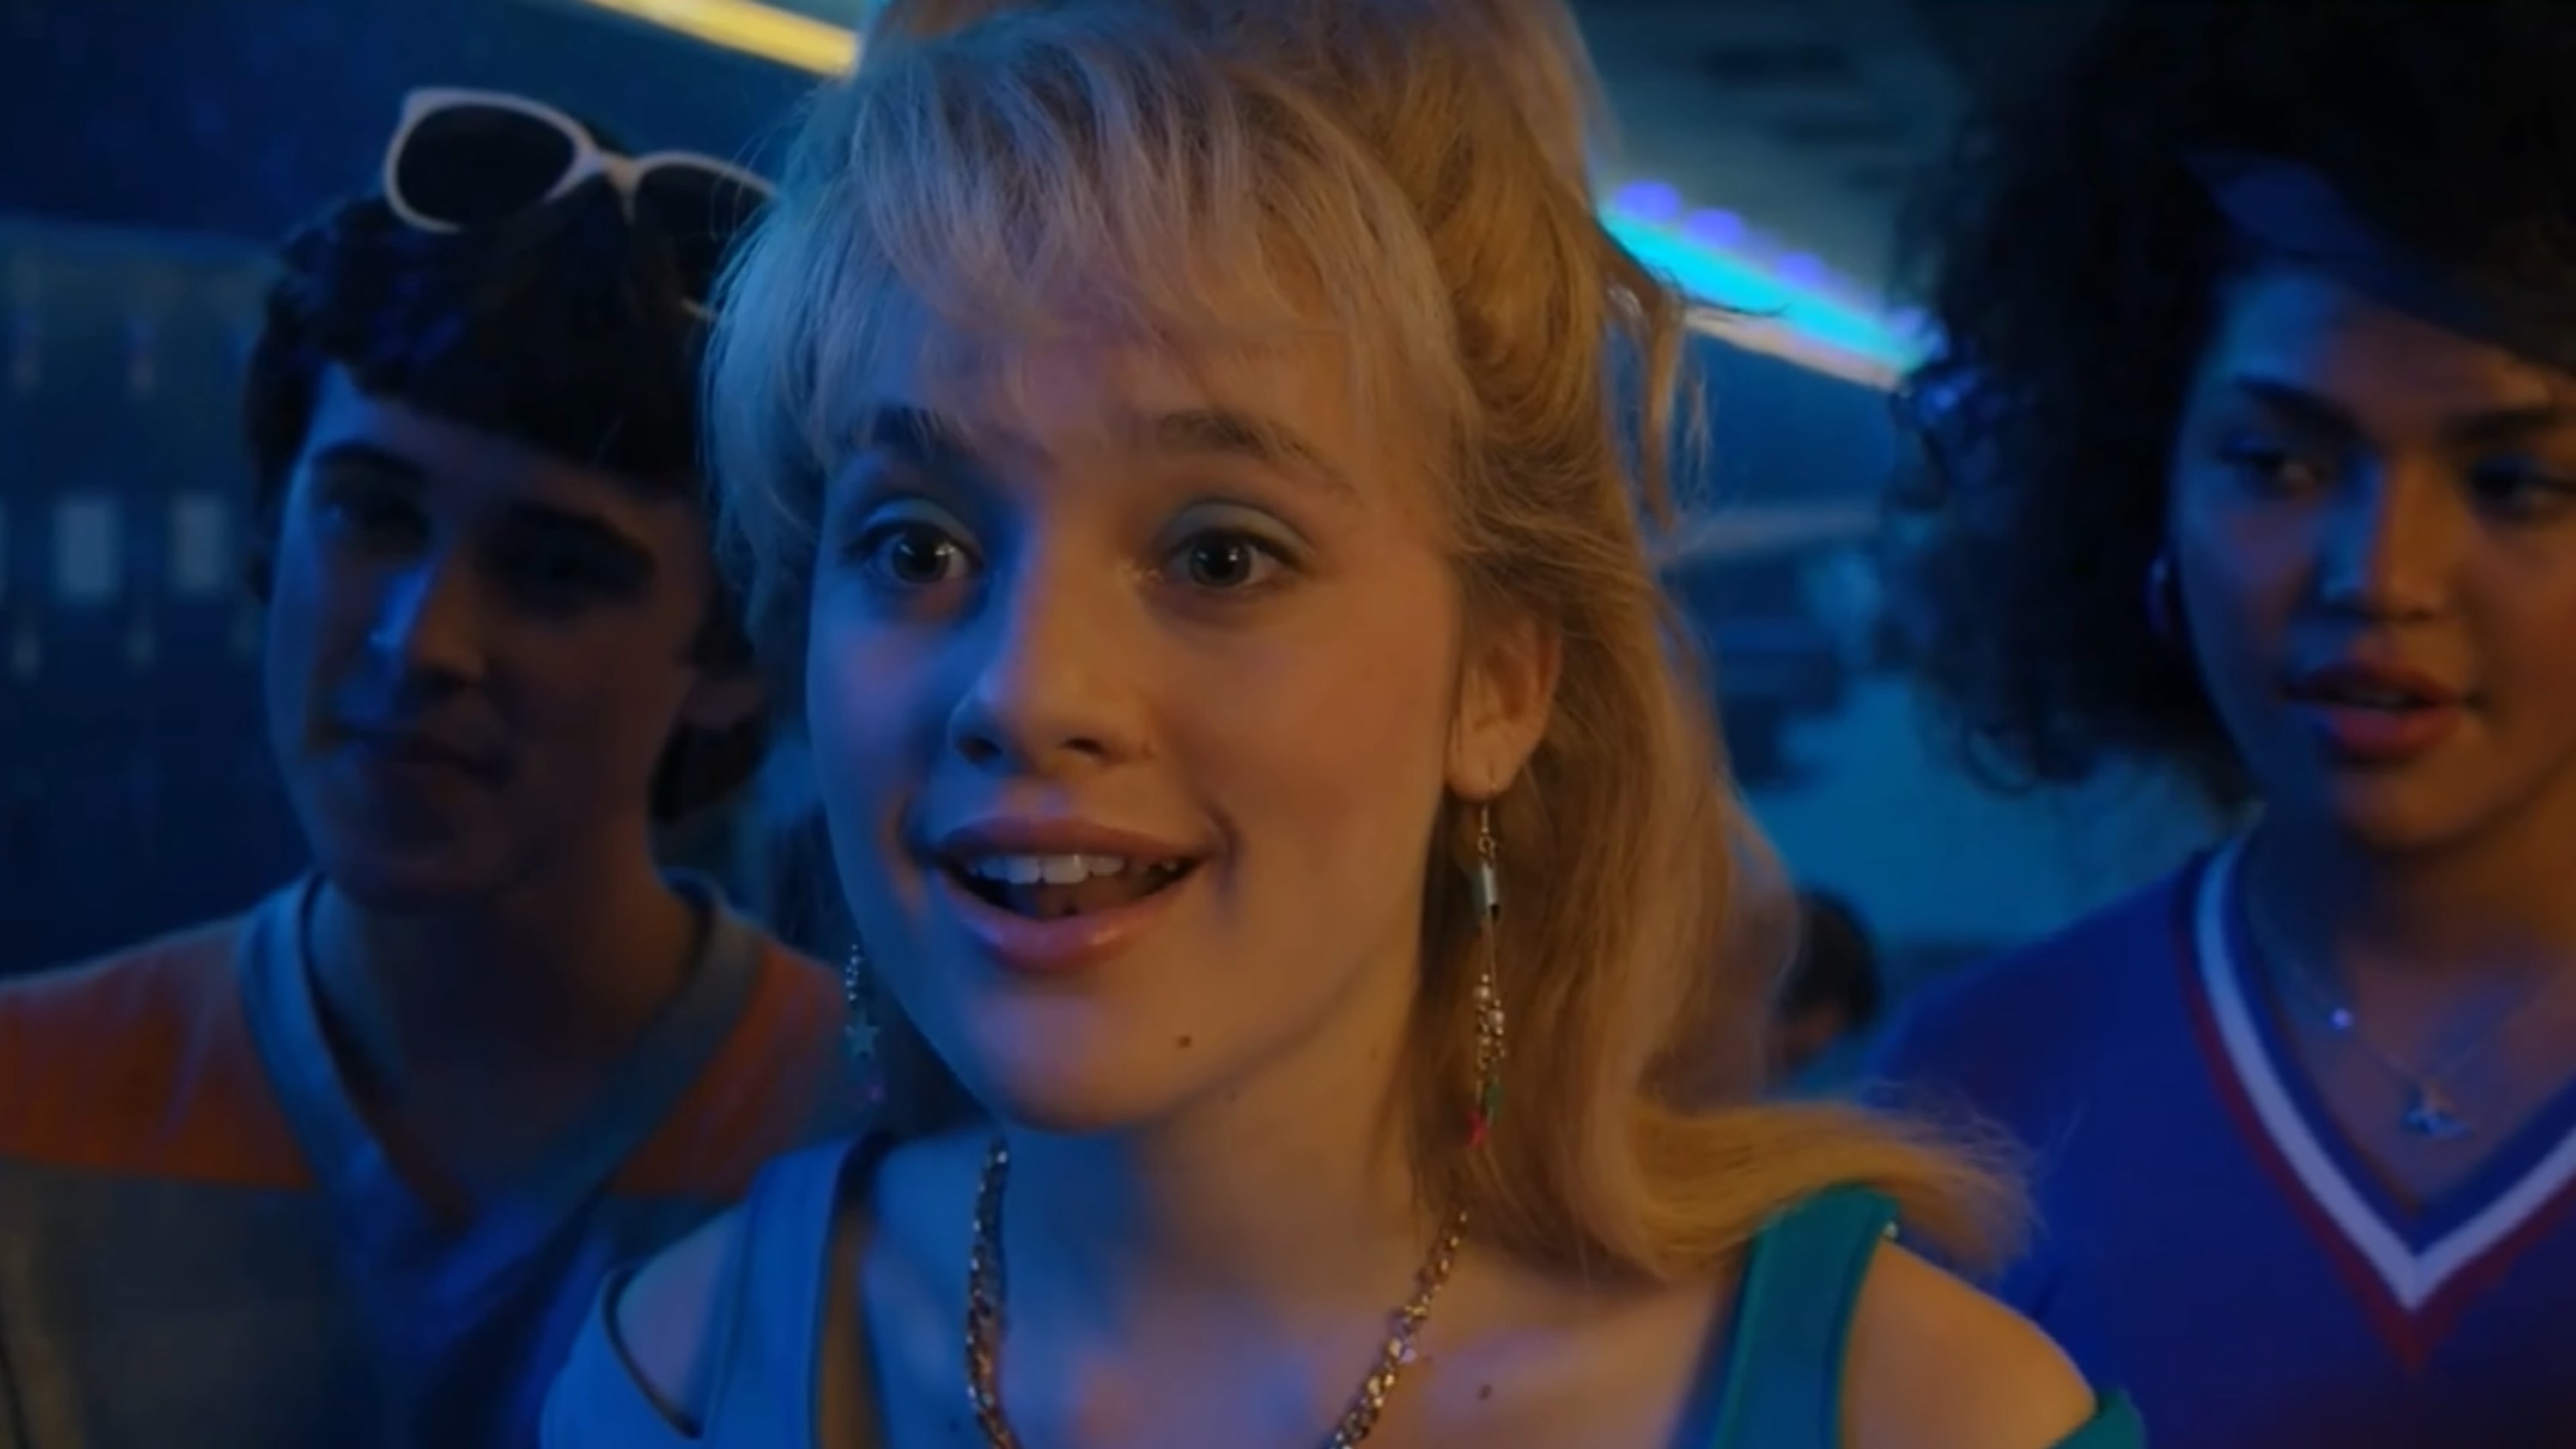 Angela and her friends at the roller rink in &quot;Stranger Things&quot;